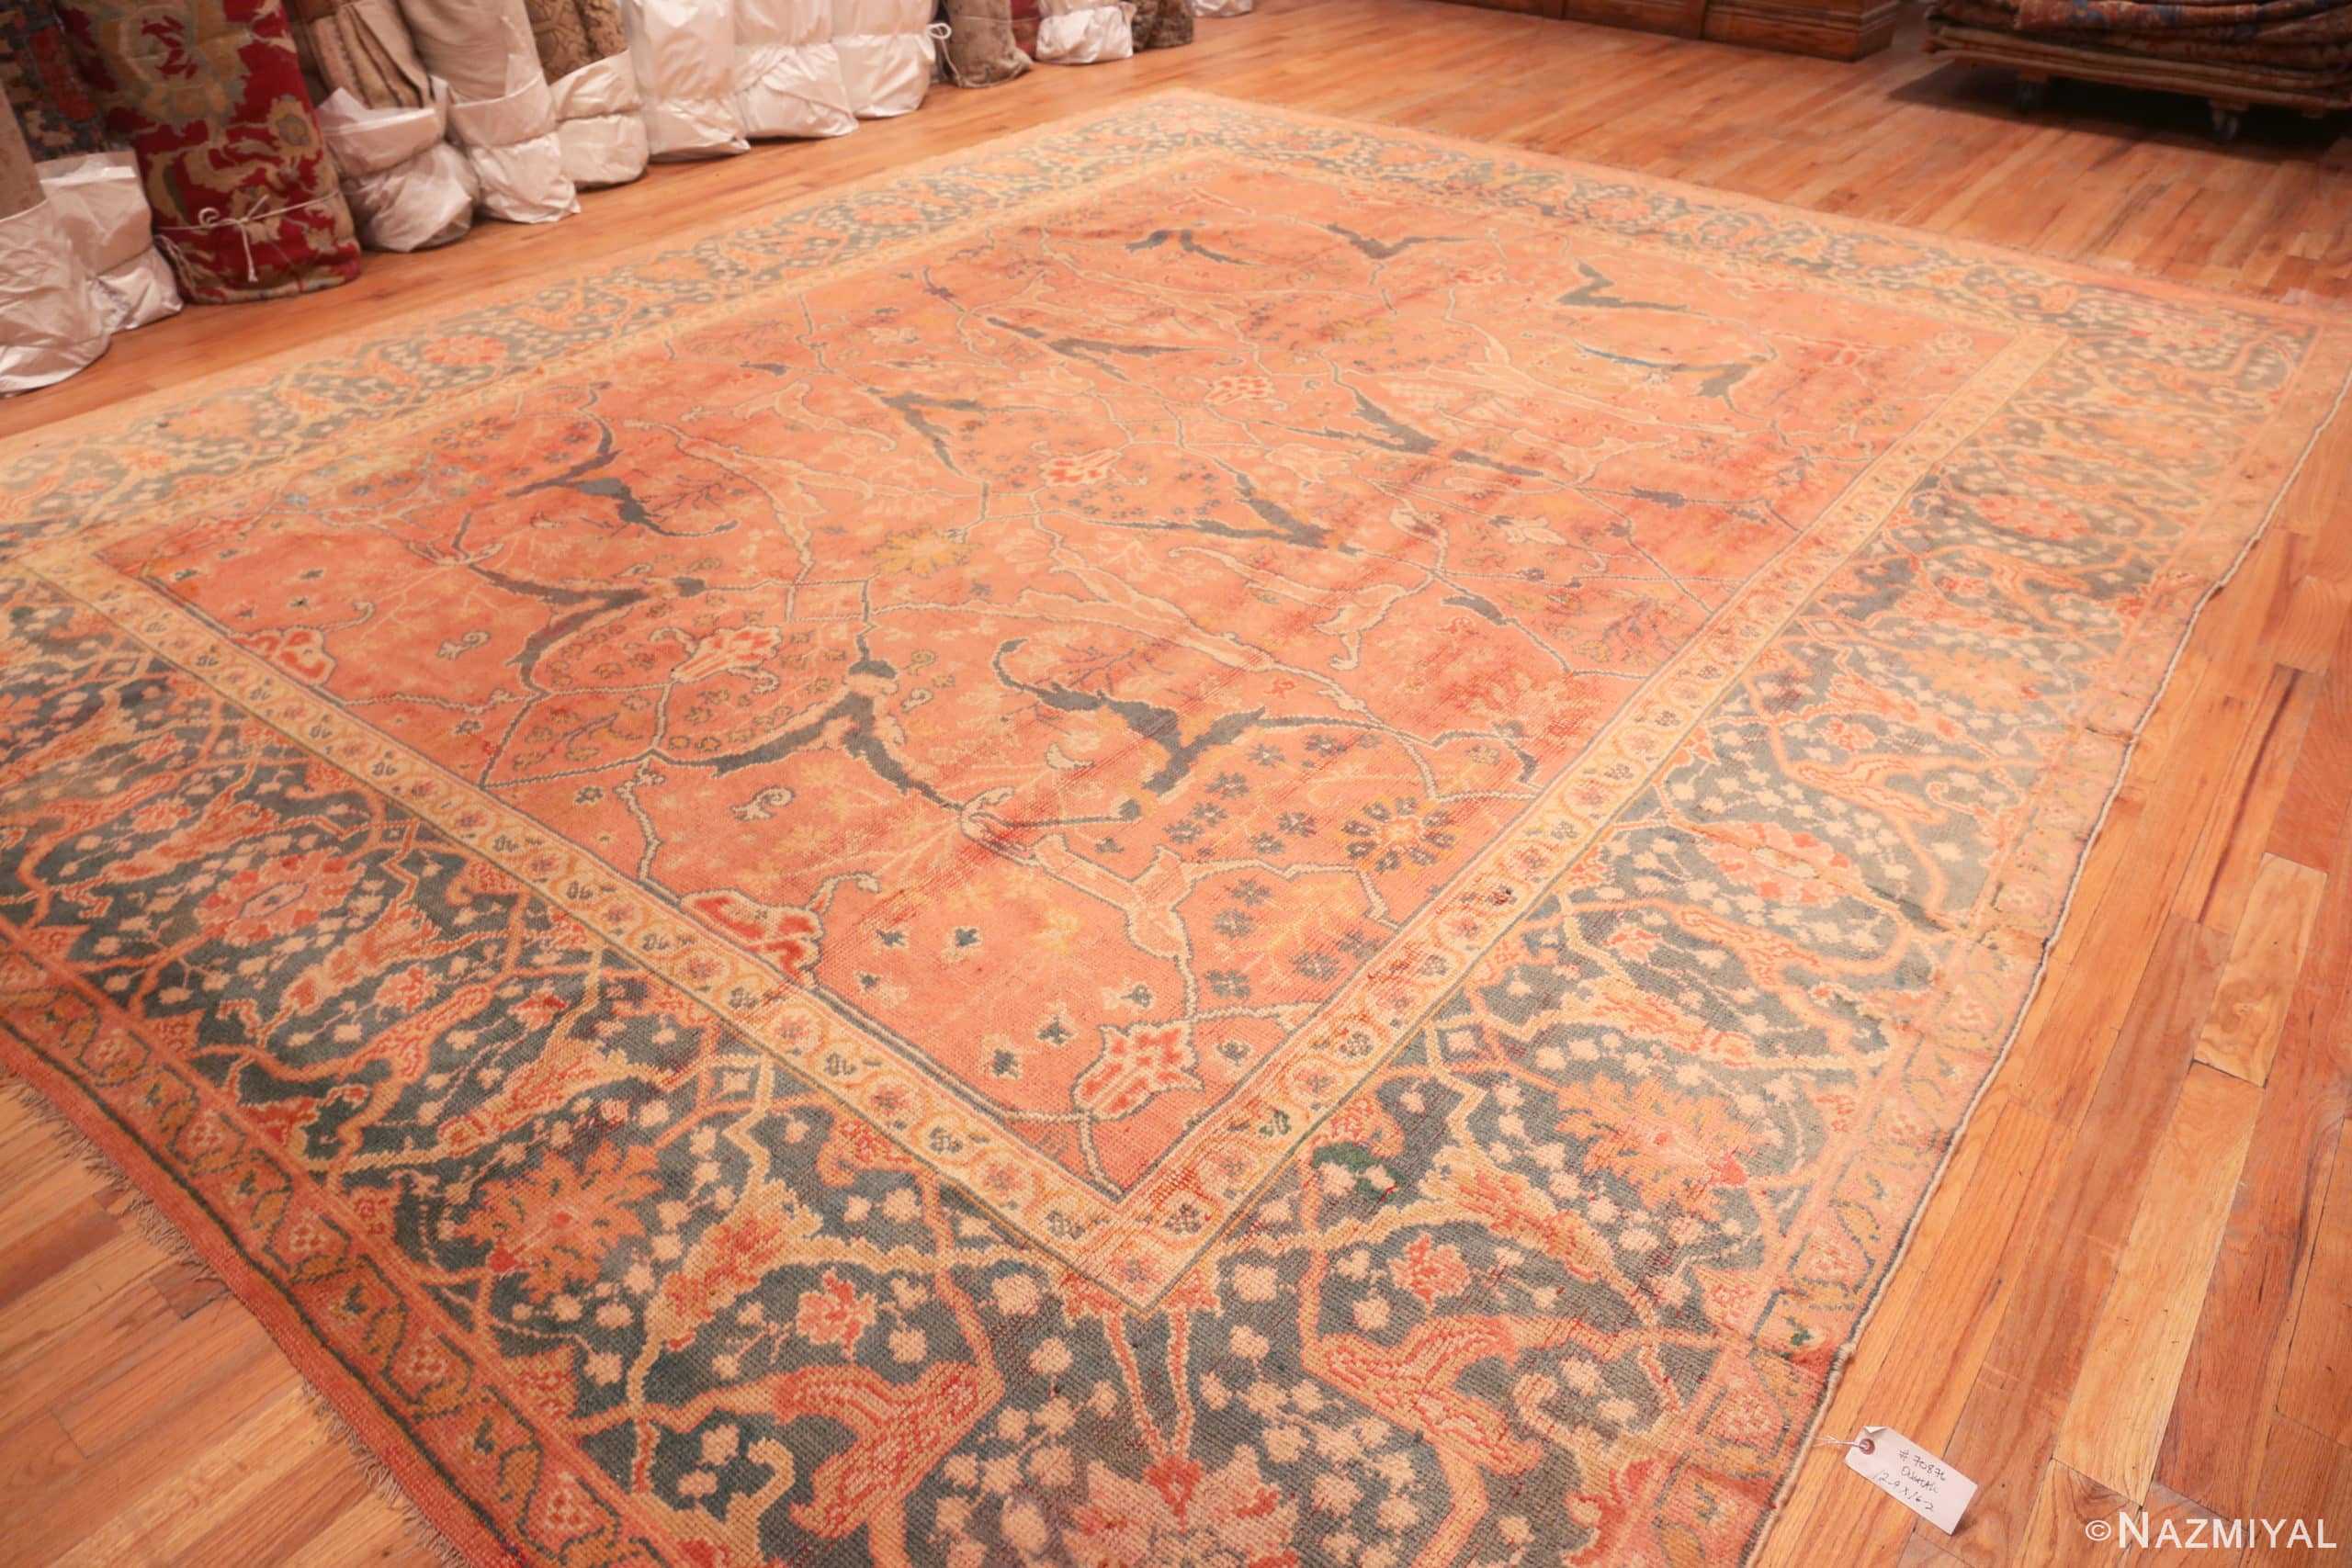 Whole View Of Large Coral Antique Turkish Oushak Area Rug 70876 by Nazmiyal Antique Rugs